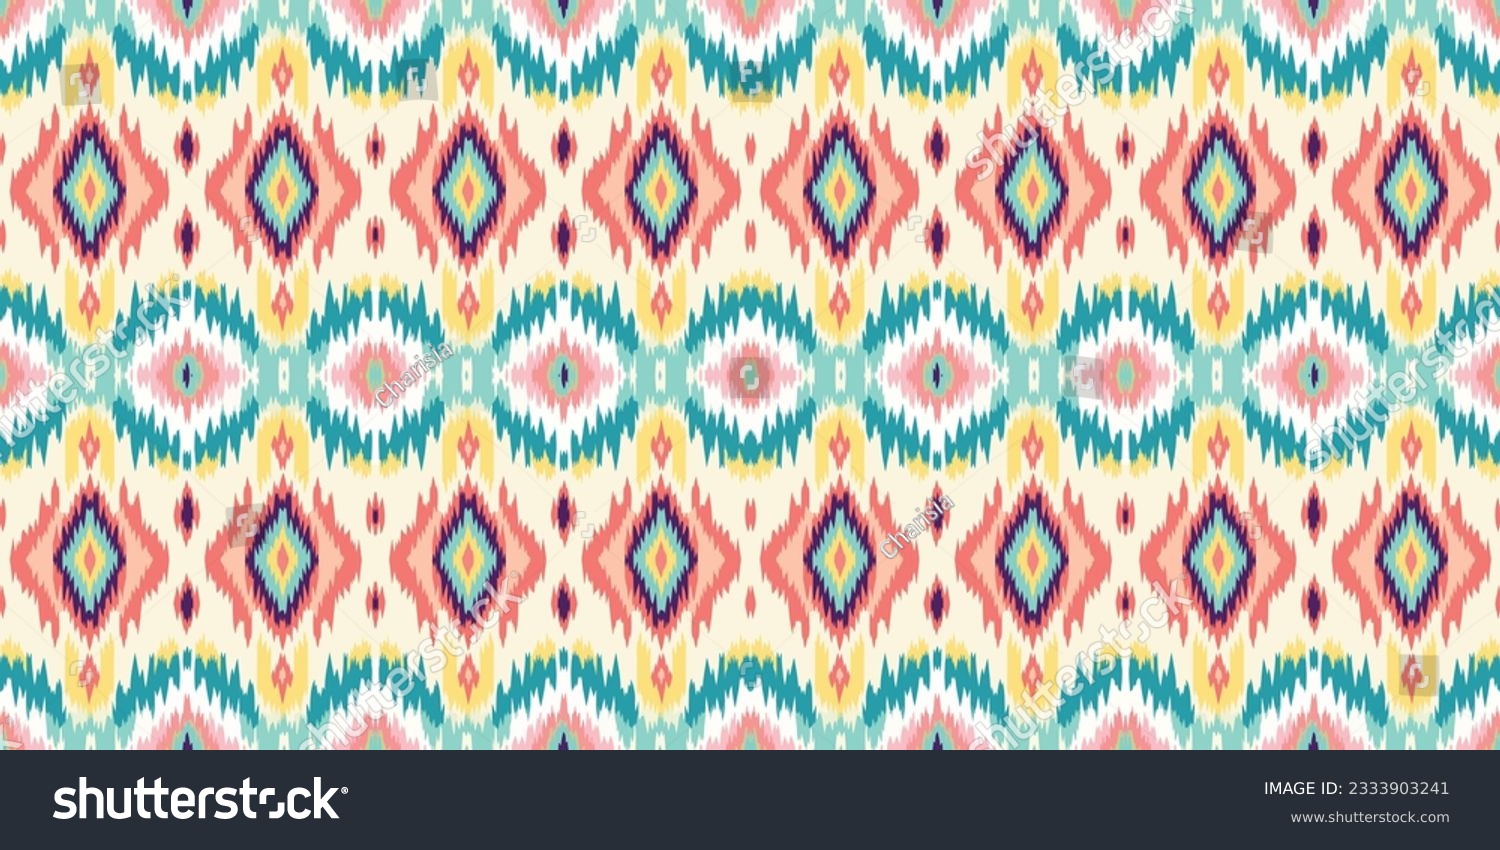 SVG of Seamless batik pattern,Seamless Betawi batik pattern,and Seamless motif pattern resemble ethnic boho, Aztec,and ikat styles.designed for use in satin,wallpaper,fabric,curtain,carpet,Batik Embroidery svg